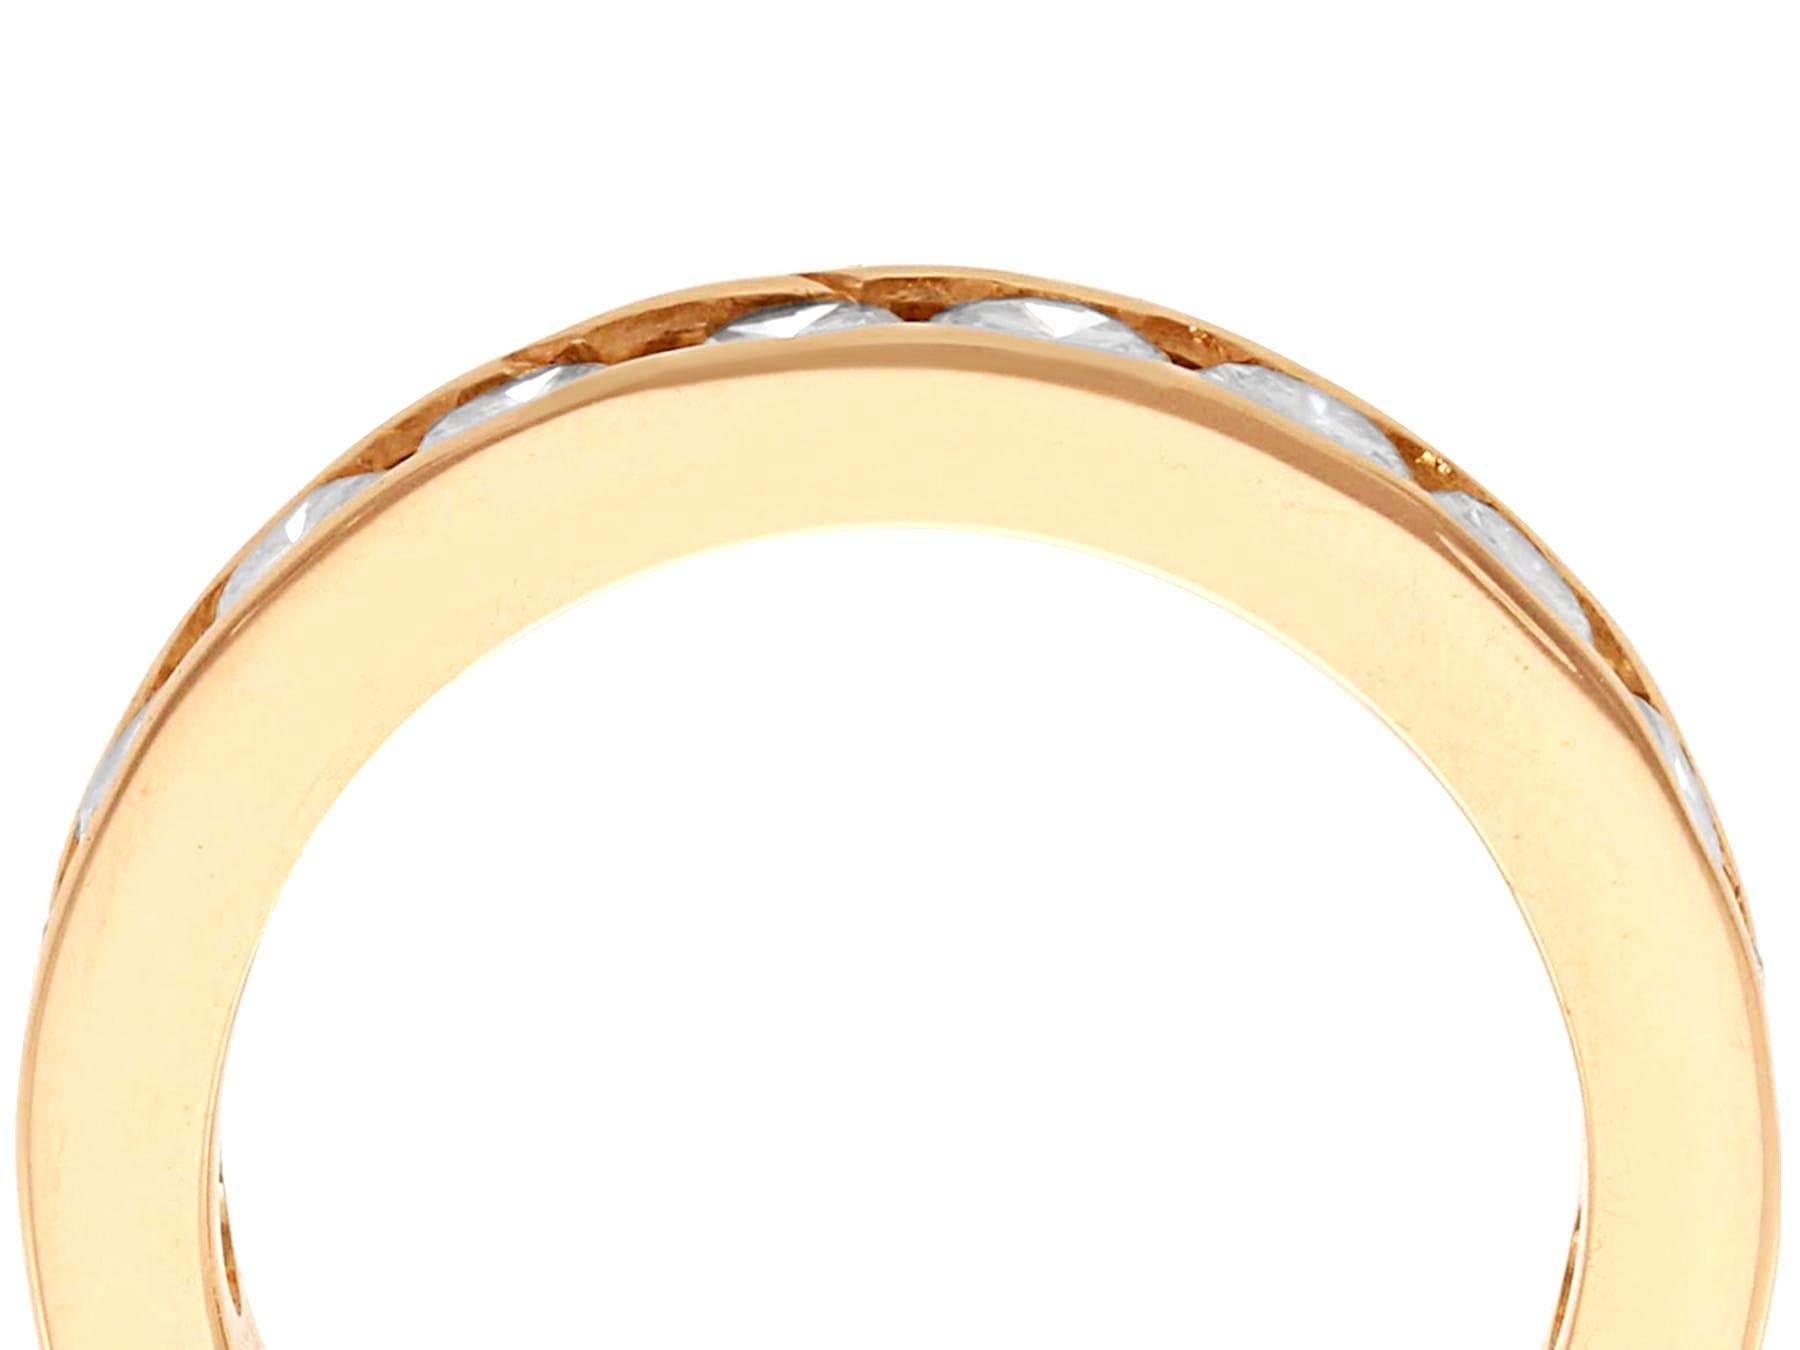 A fine and impressive vintage 1950's 1.76 carat diamond and 18 karat rose gold three quarter eternity ring; part of our diverse diamond jewellery and estate jewelry collections.

This fine and impressive vintage eternity ring has been crafted in 18k